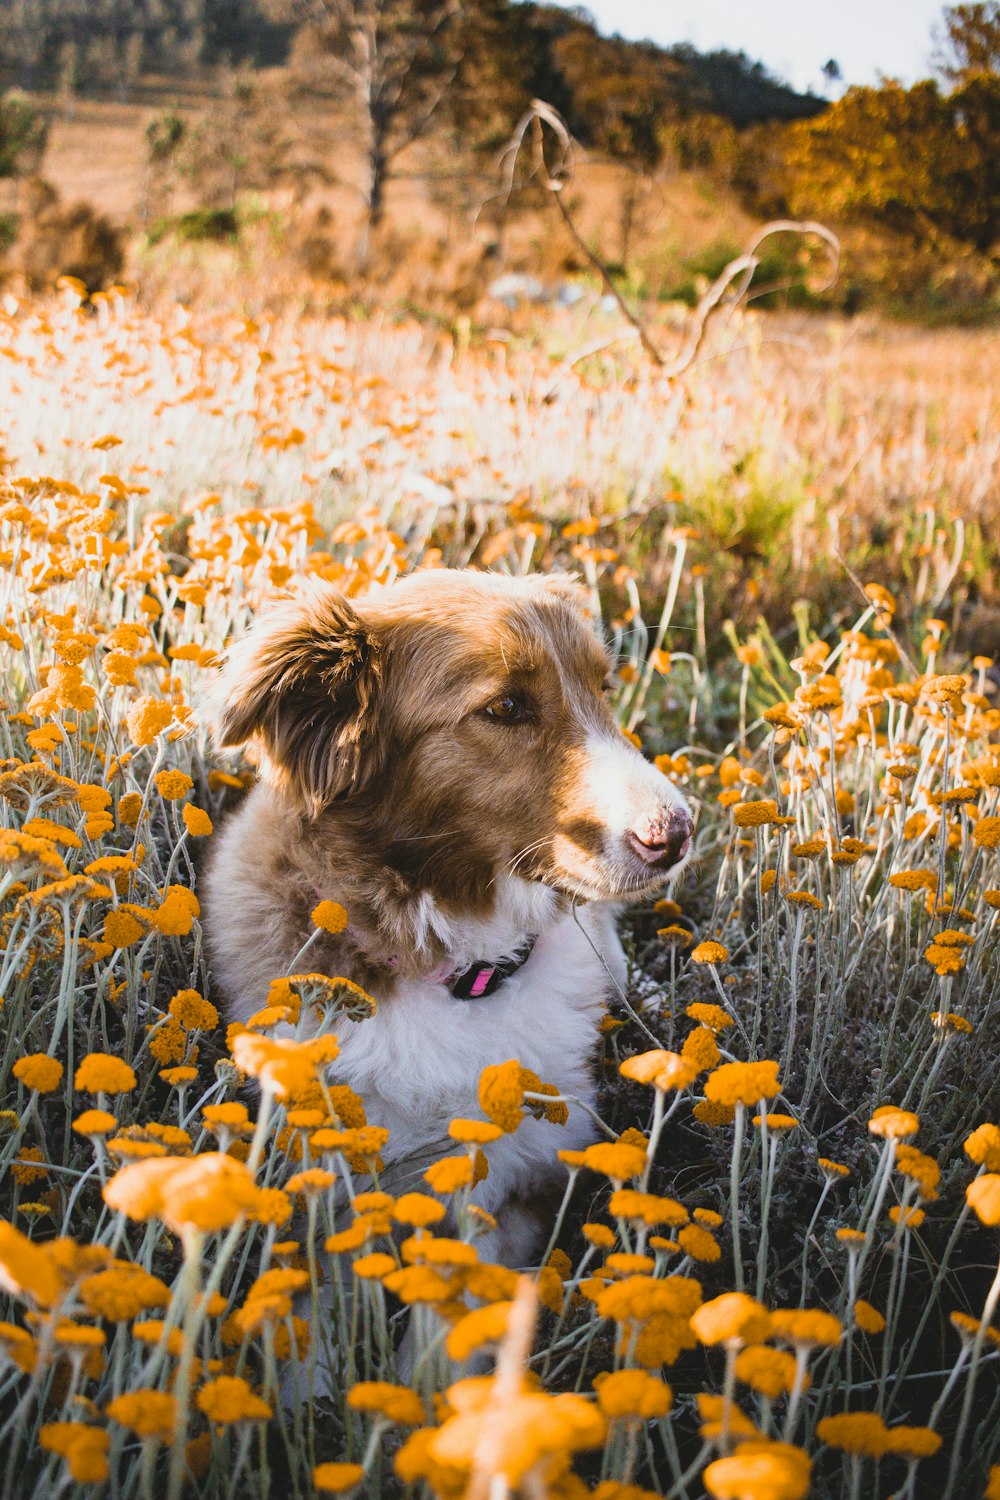 brown and white long coated dog on yellow flower field during daytime